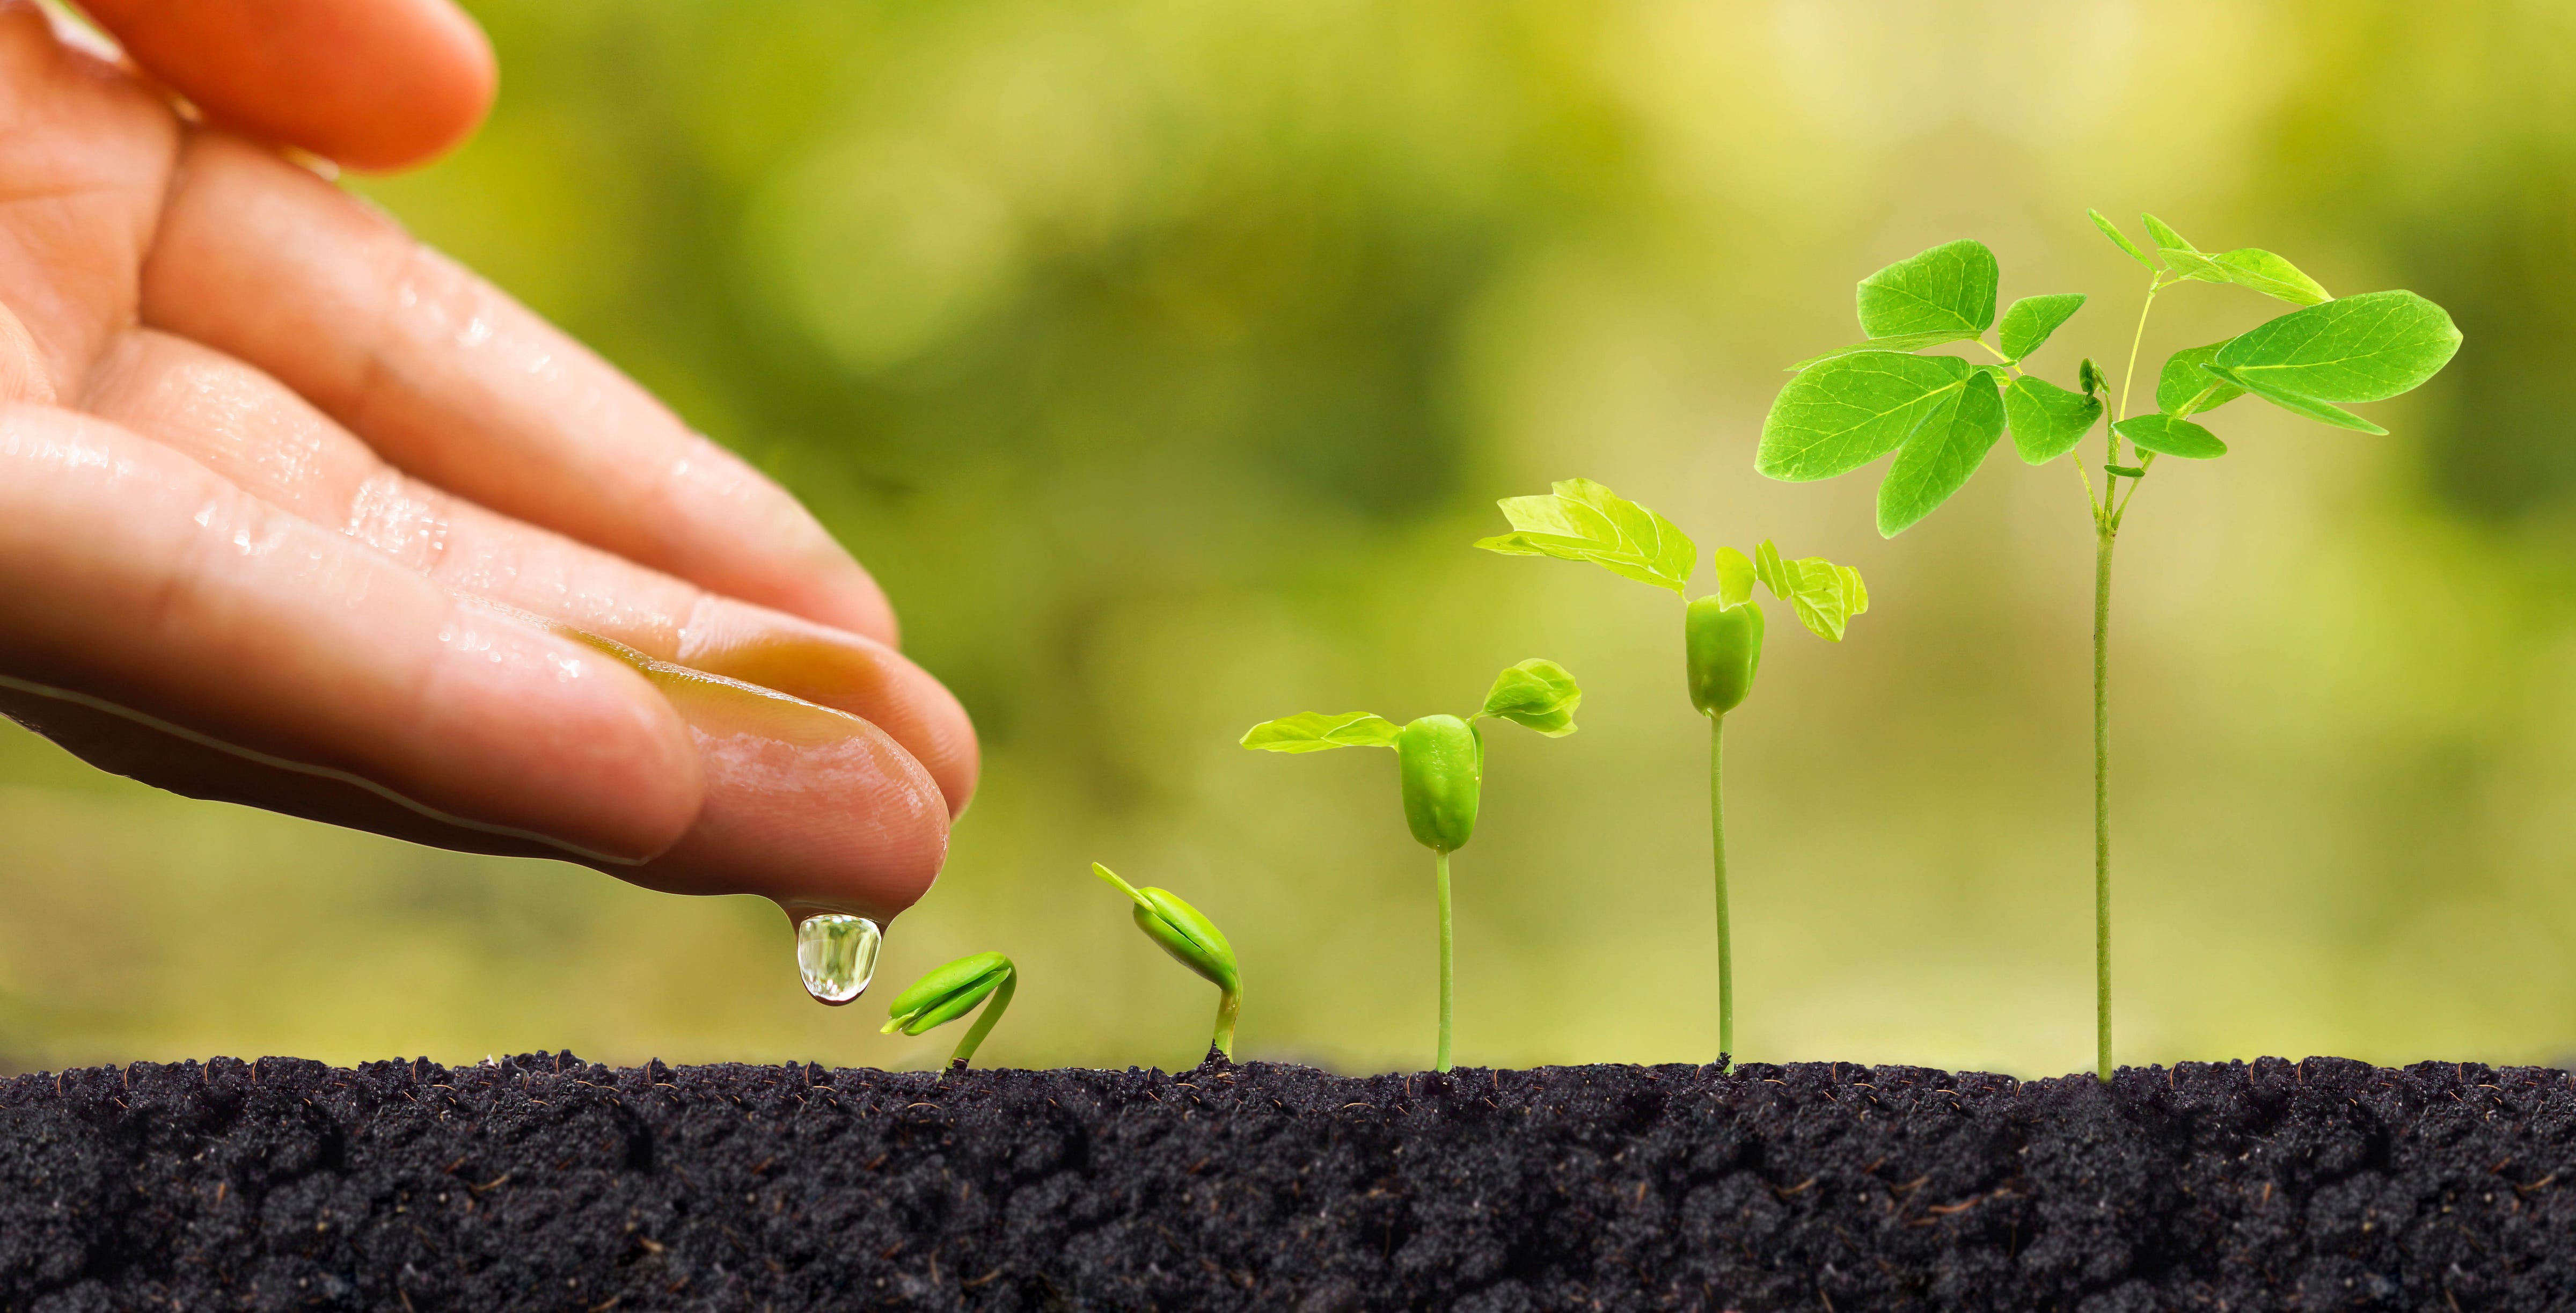 Planting a Seed: 5 Funding Options to Get Your New Startup Off the Ground